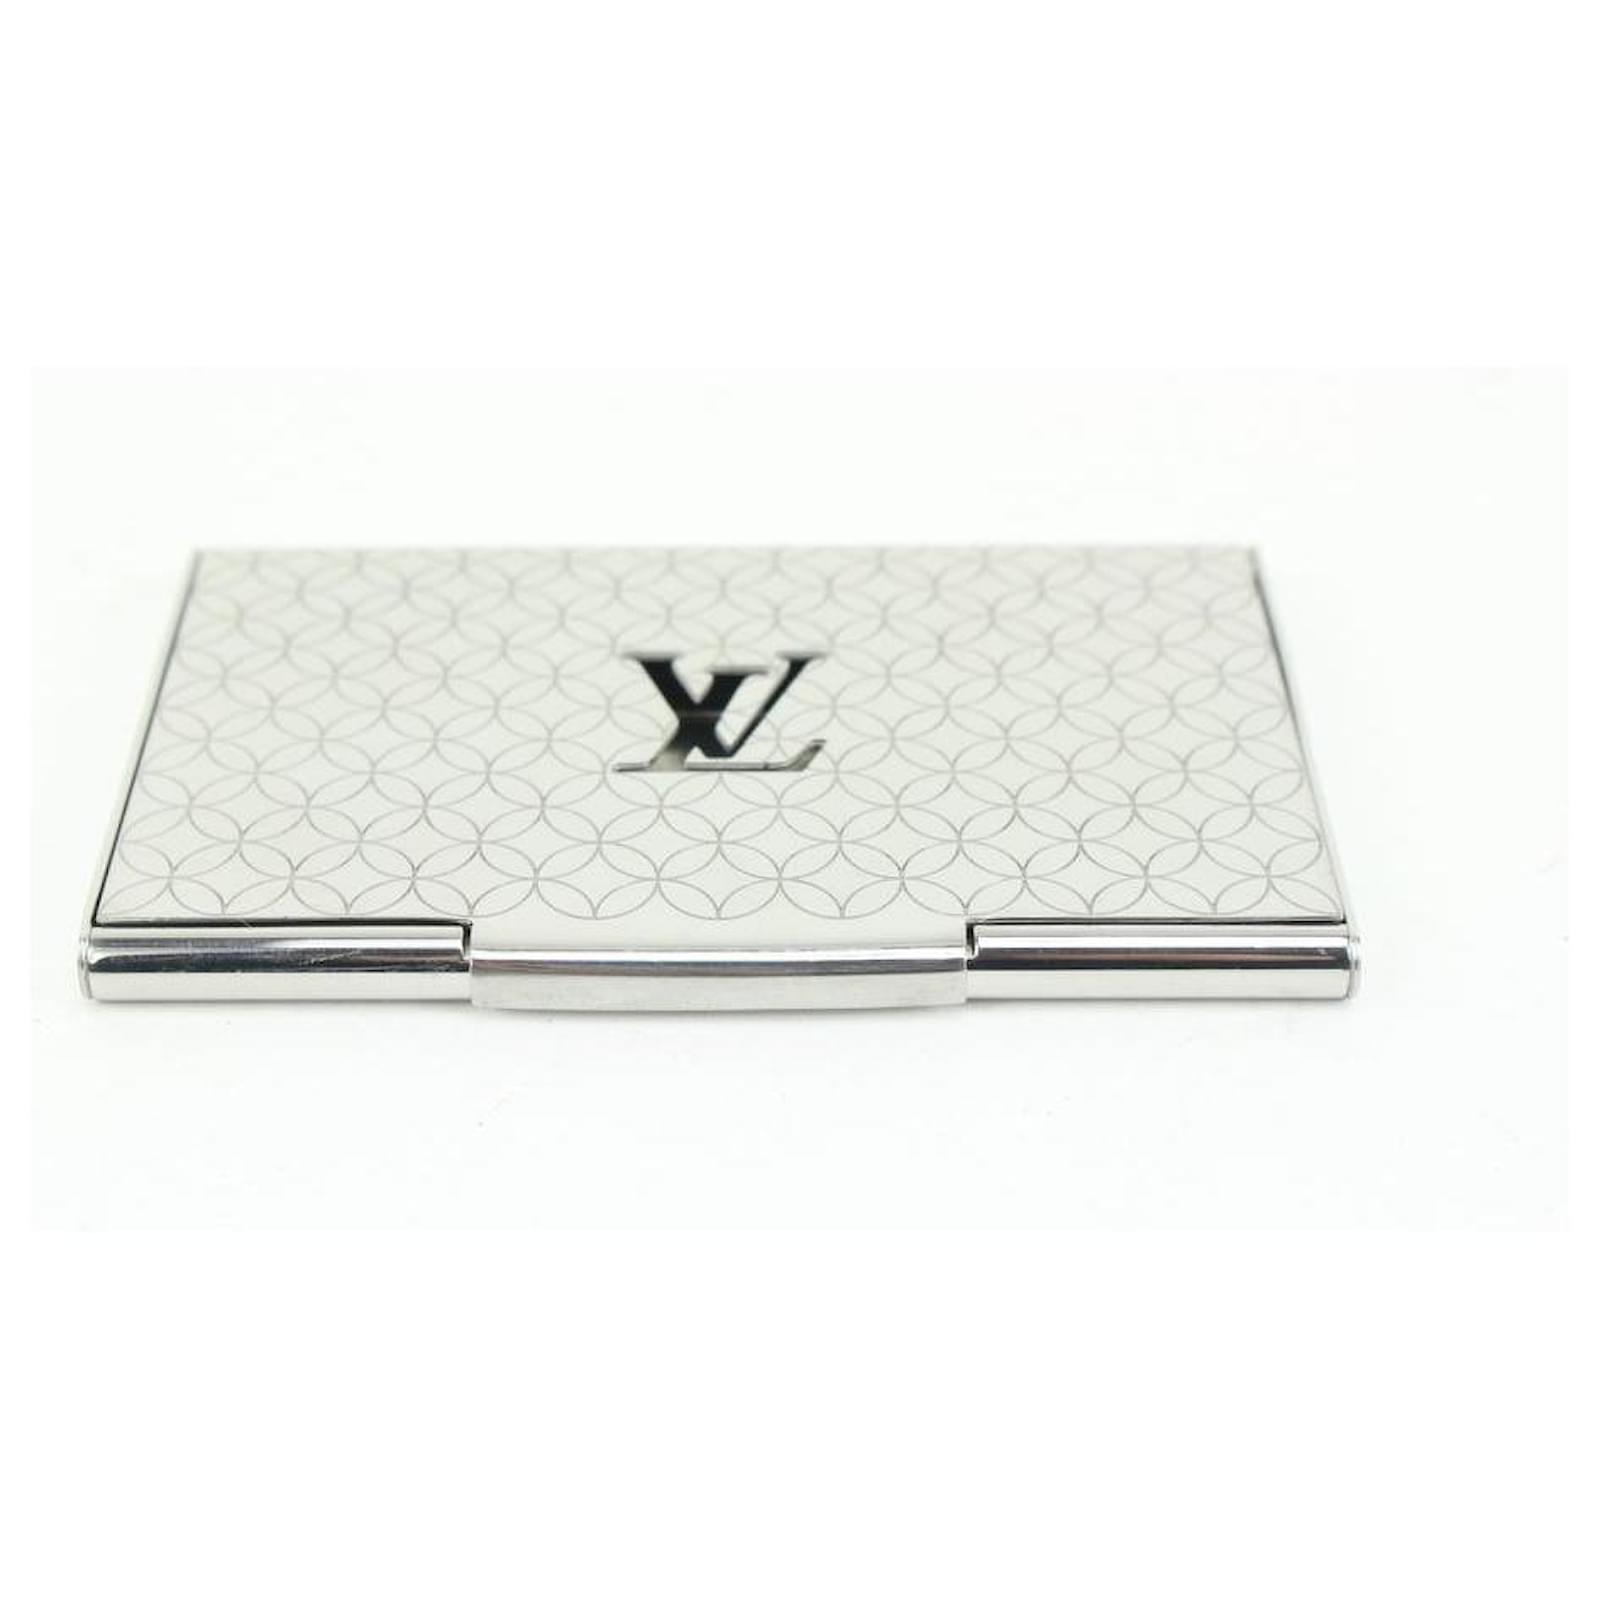 Buy Online Louis Vuitton-Champs Elysees Card Holder-M65227 at